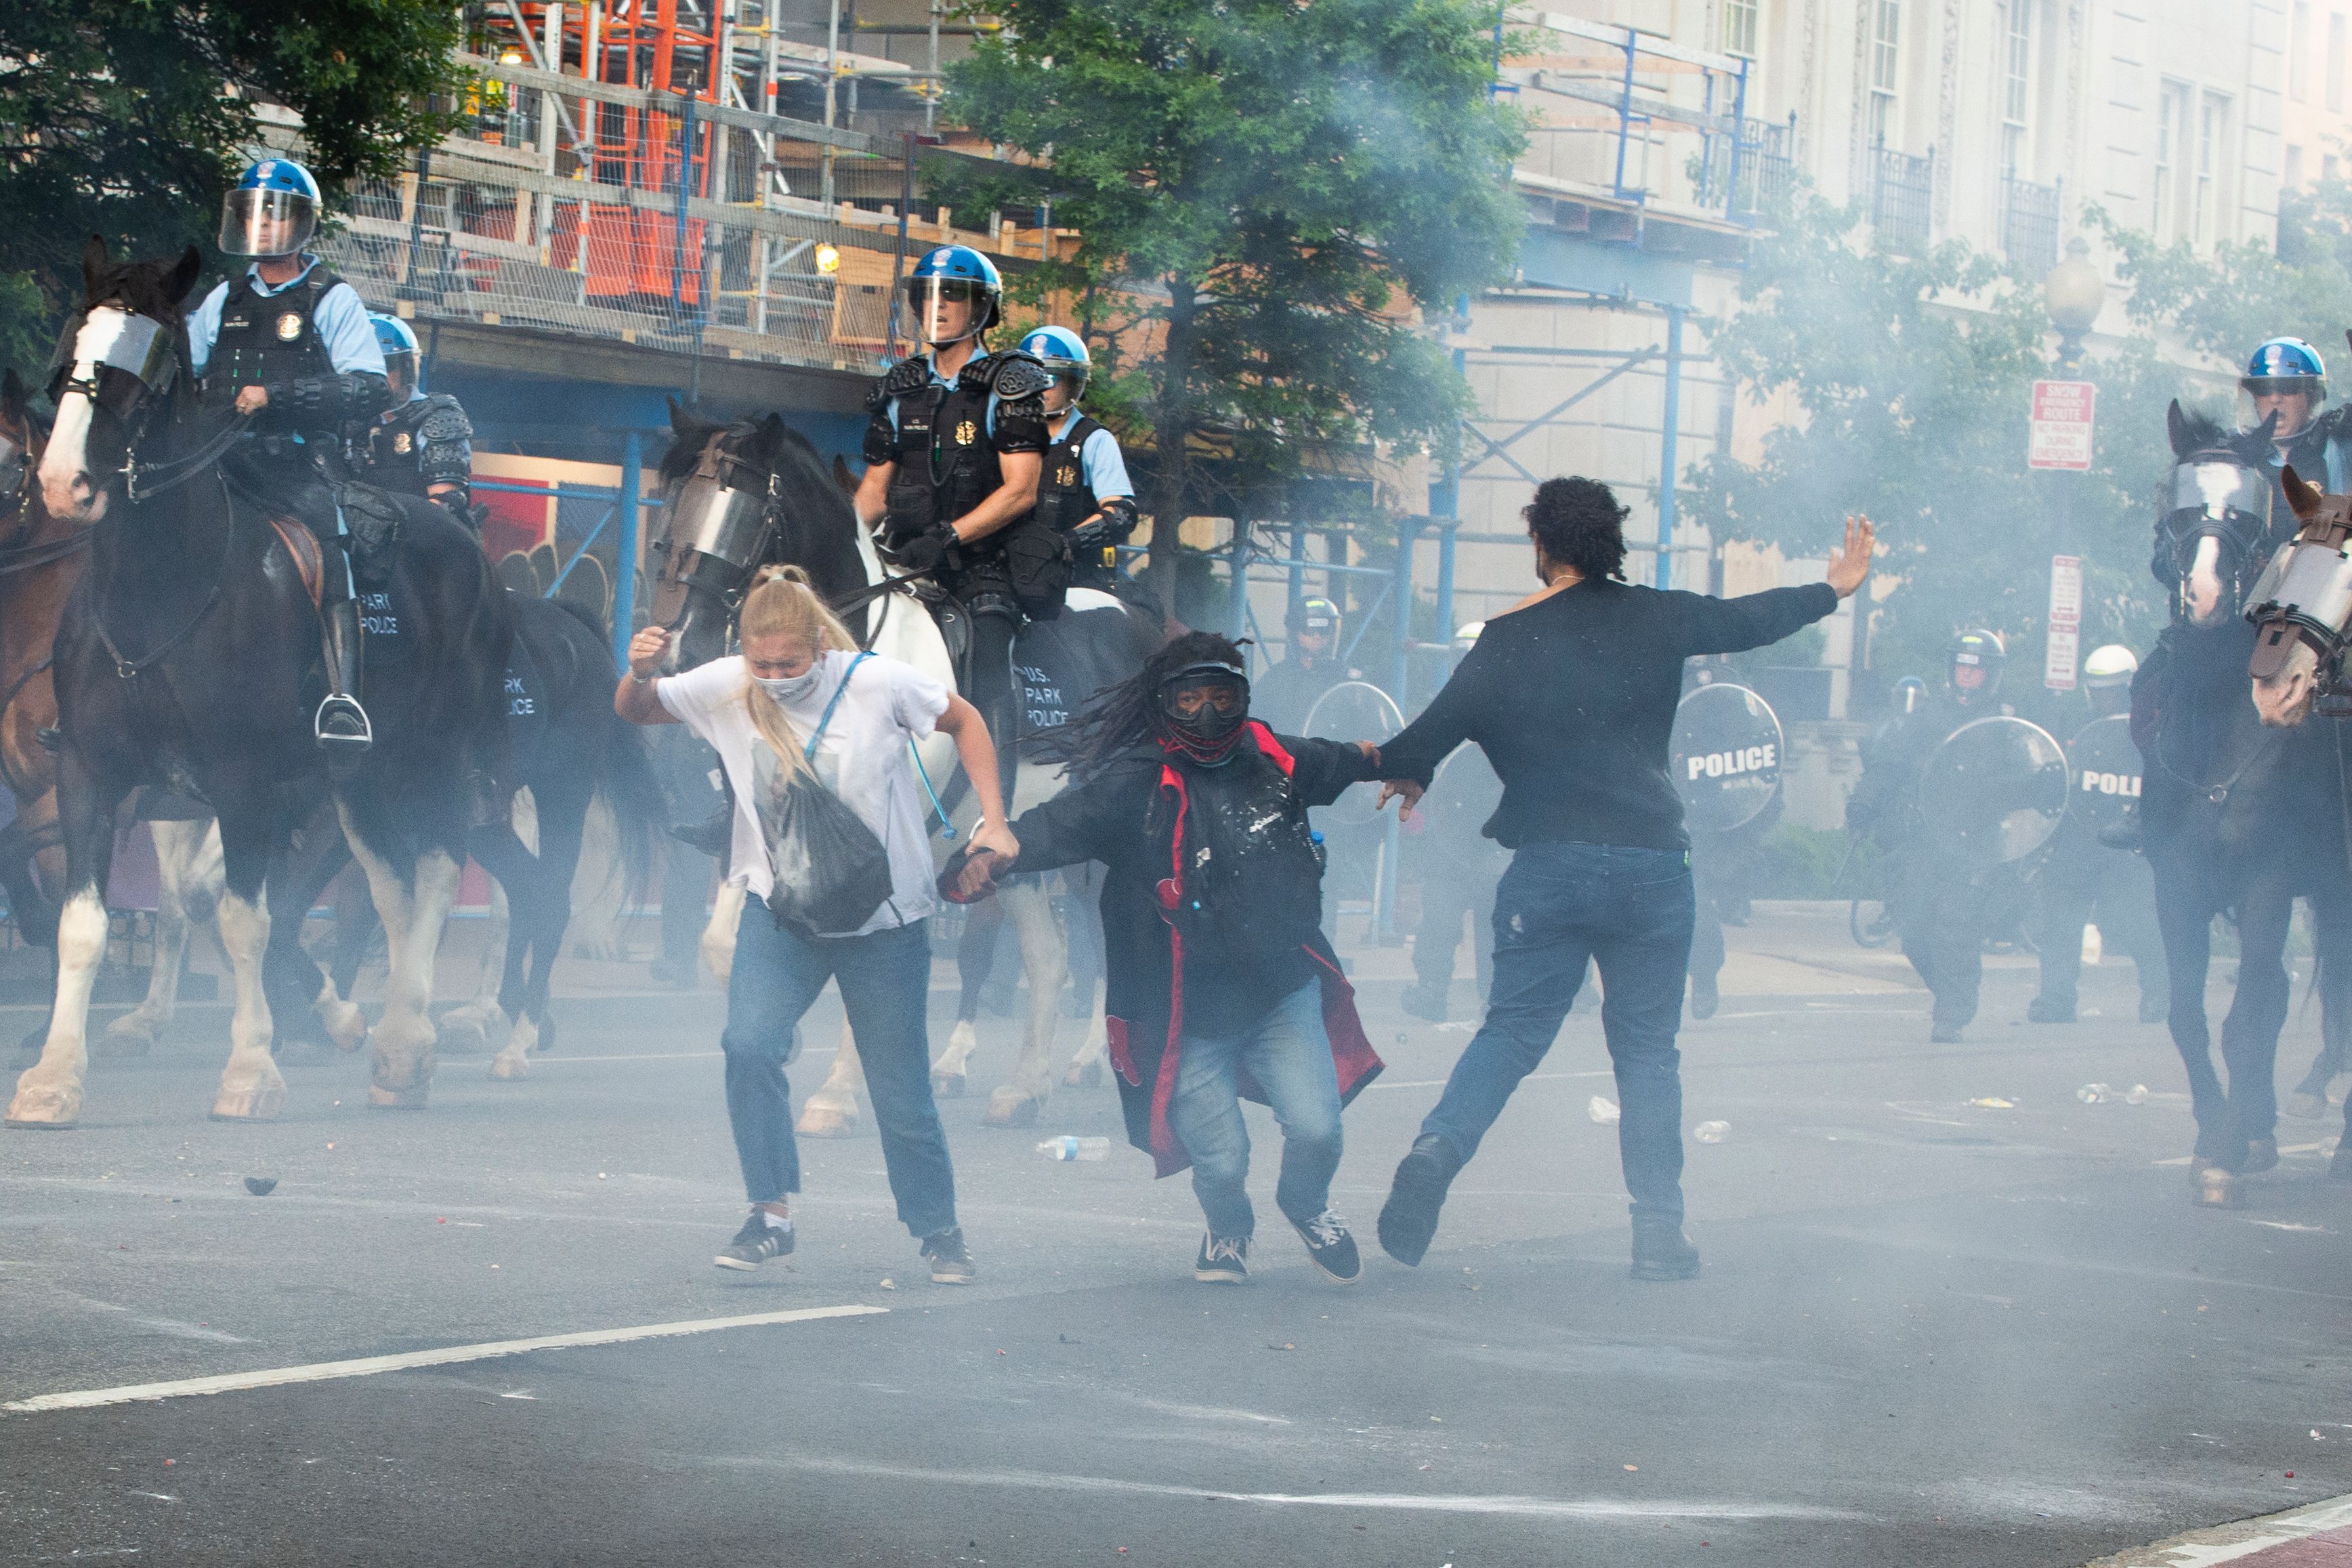 Protestors are tear gassed as the police disperse them near the White House on June 1, 2020 as demonstrations against George Floyd's death continue